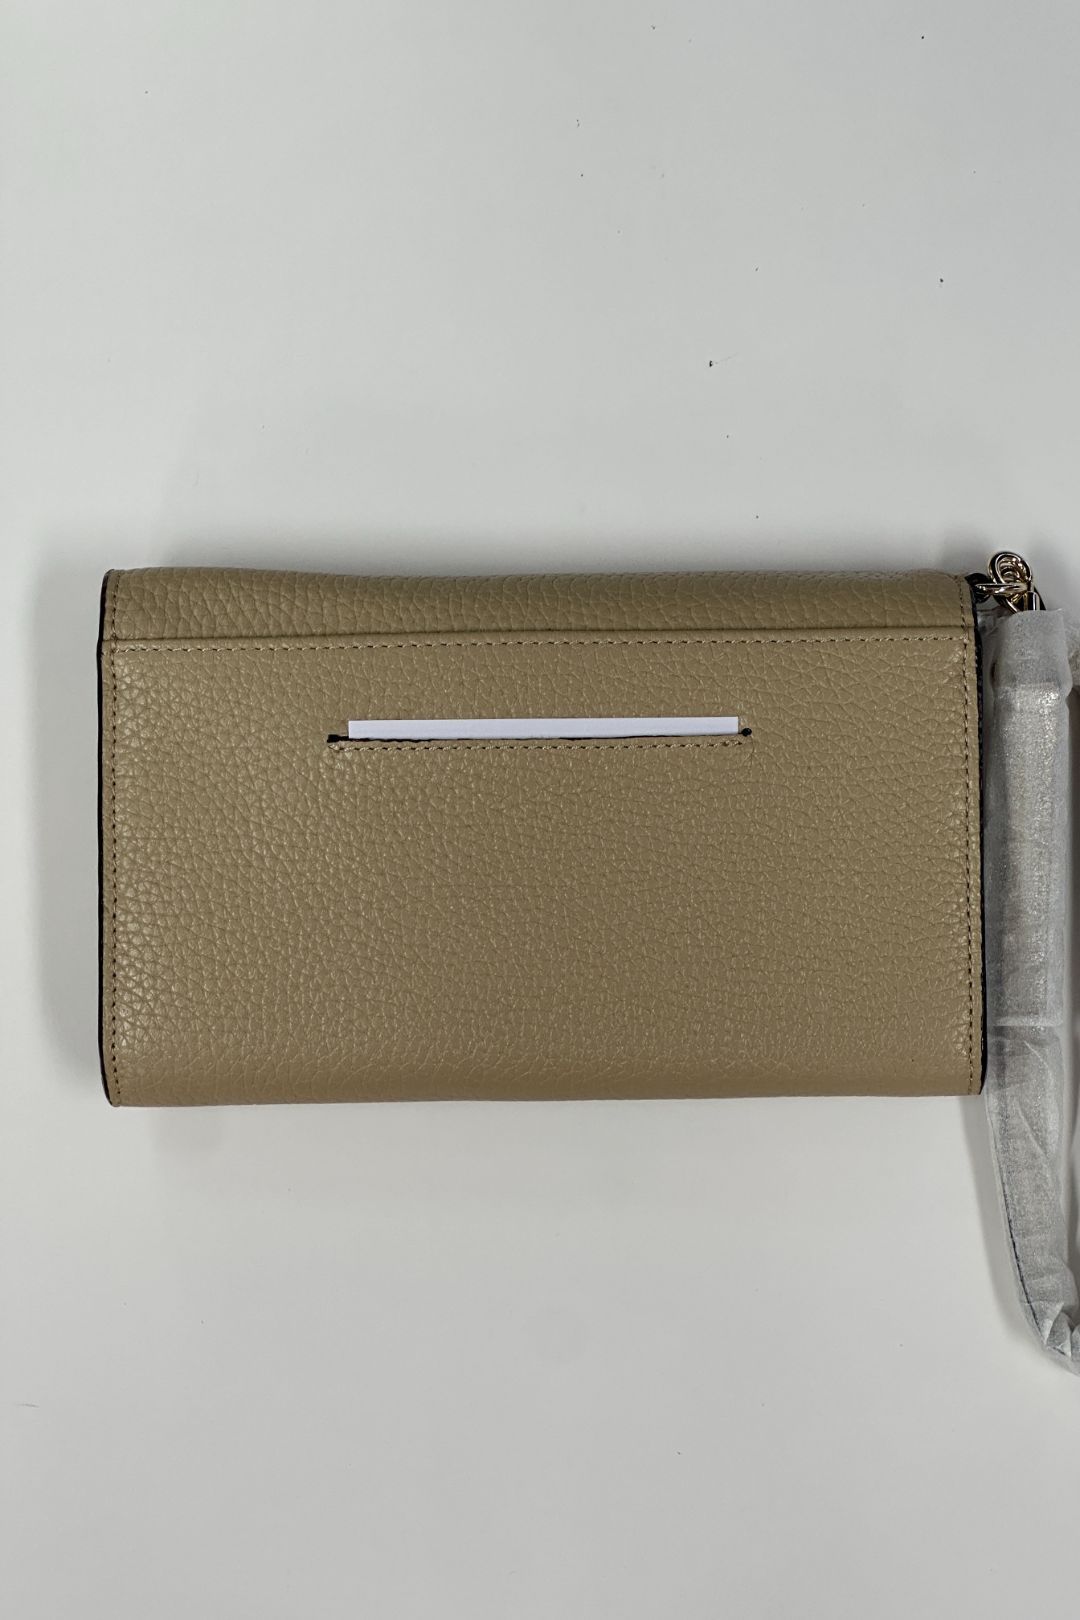 Oroton Avalon Clutch Wallet And Pouch in Taupe